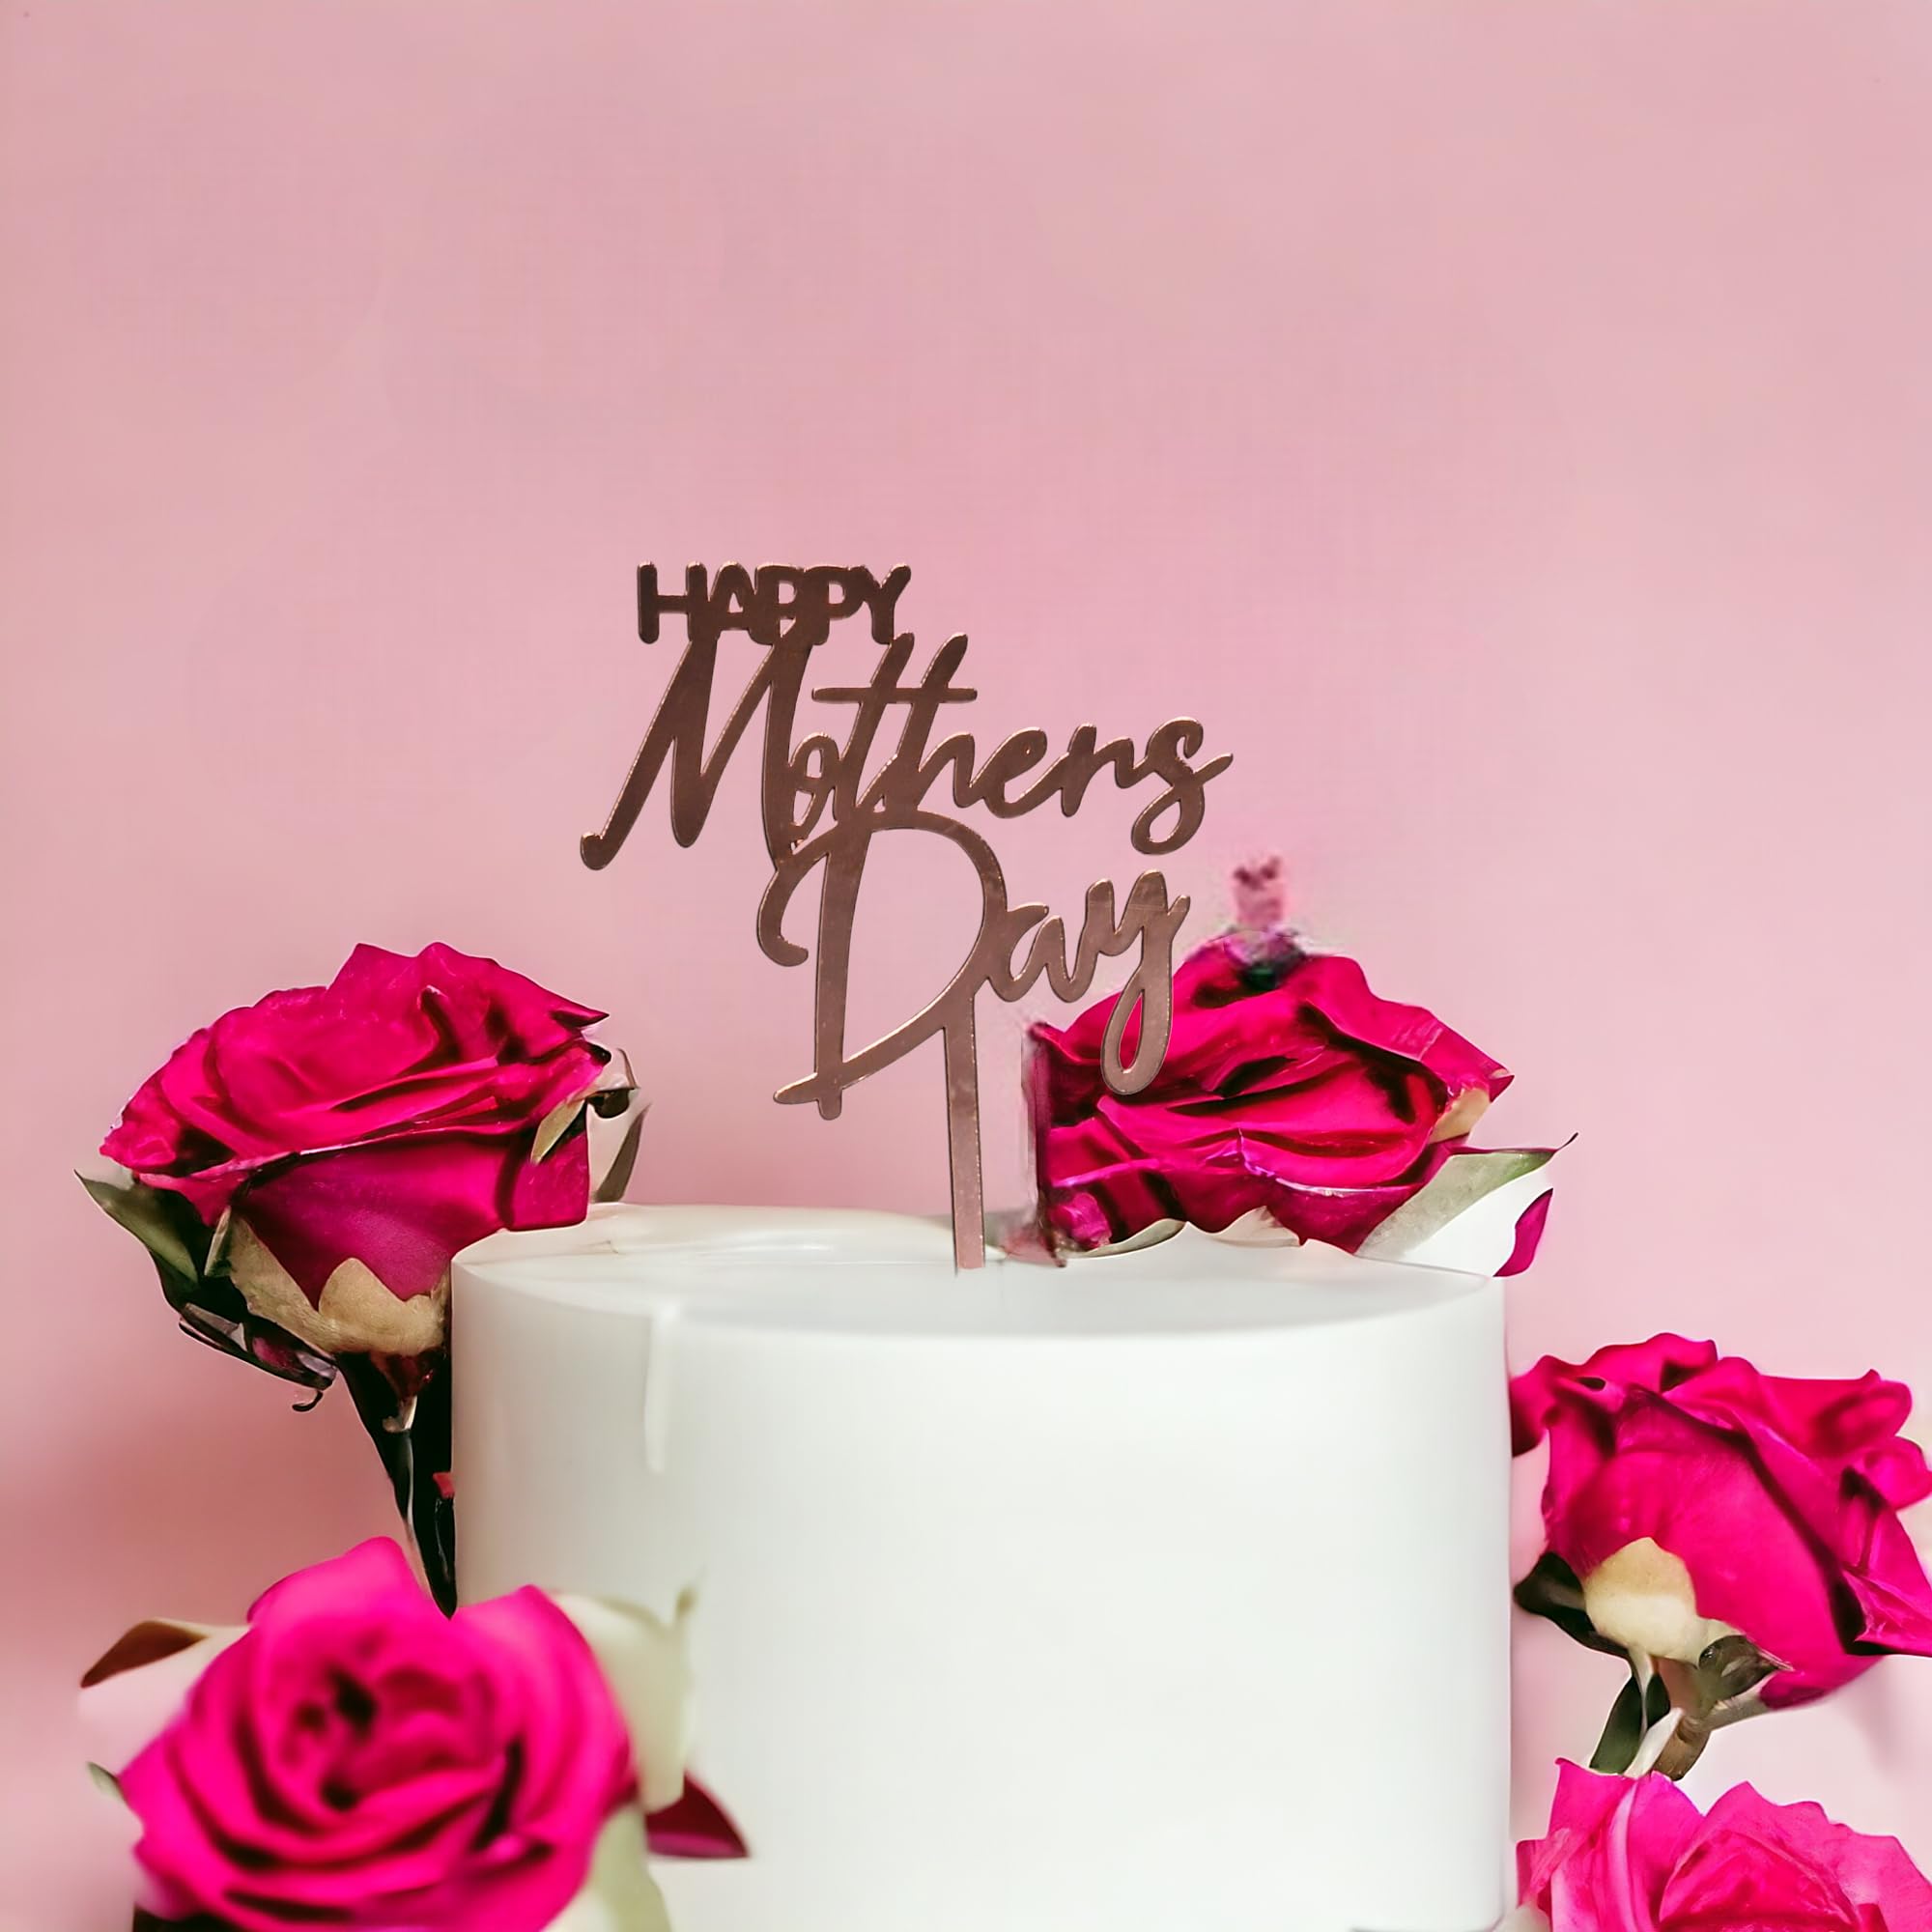 Happy Mother's Day Acrylic Cake Topper Party Decoration Cake Toppers 6"x4" ROSE GOLD